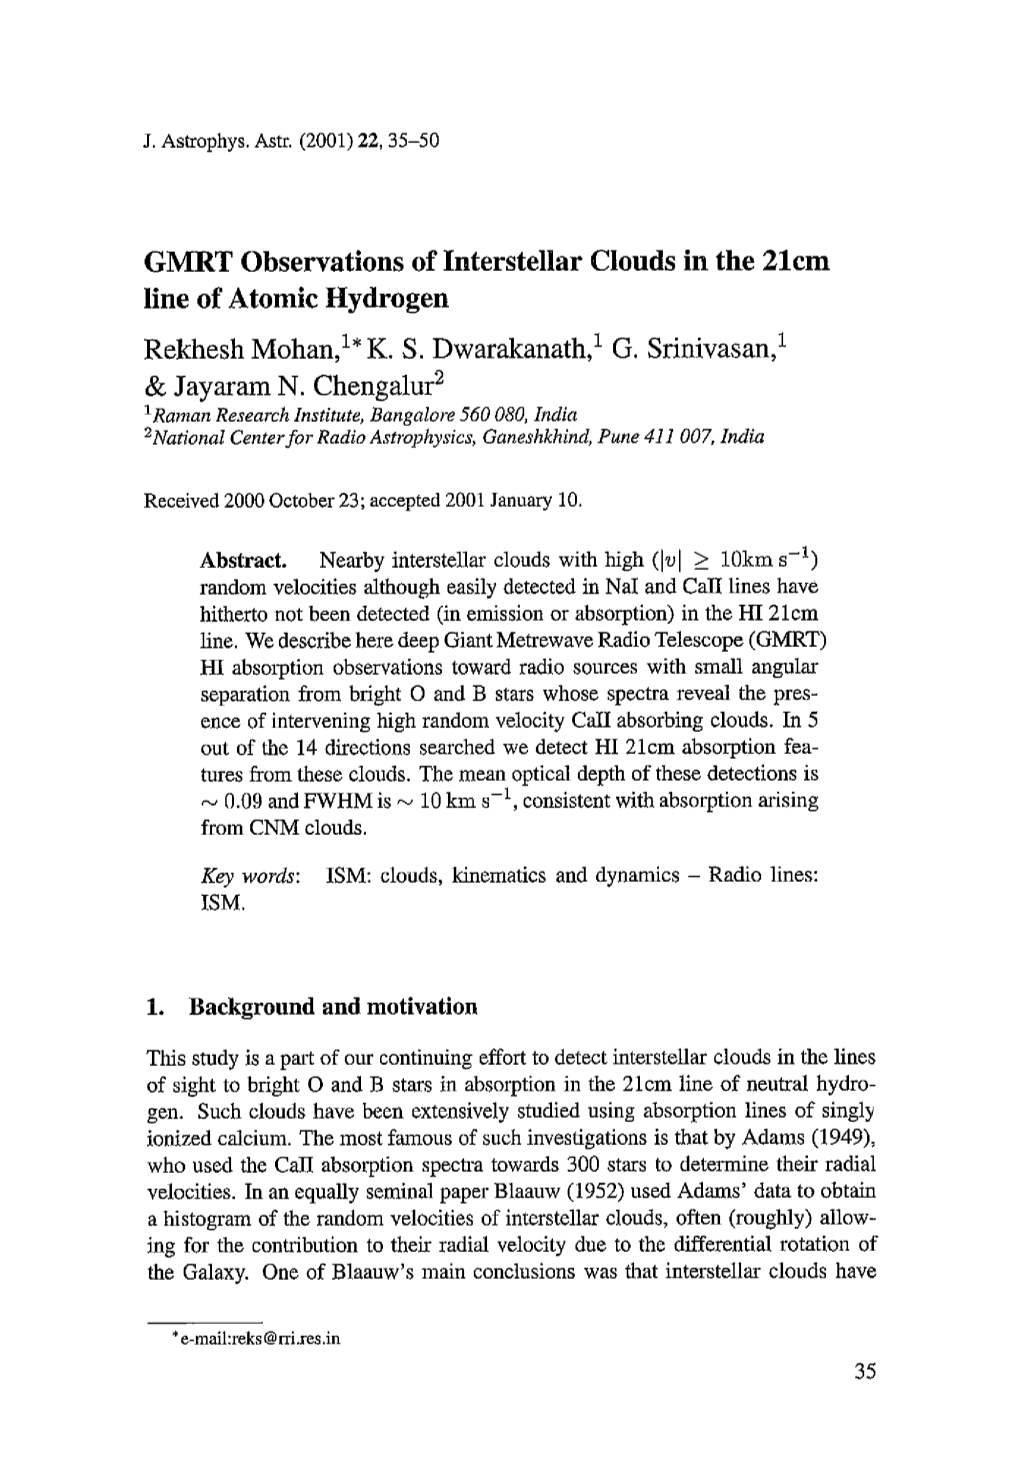 GMRT Observations of Interstellar Clouds in the 21Cm Line of Atomic Hydrogen Rekhesh Mohan, 1